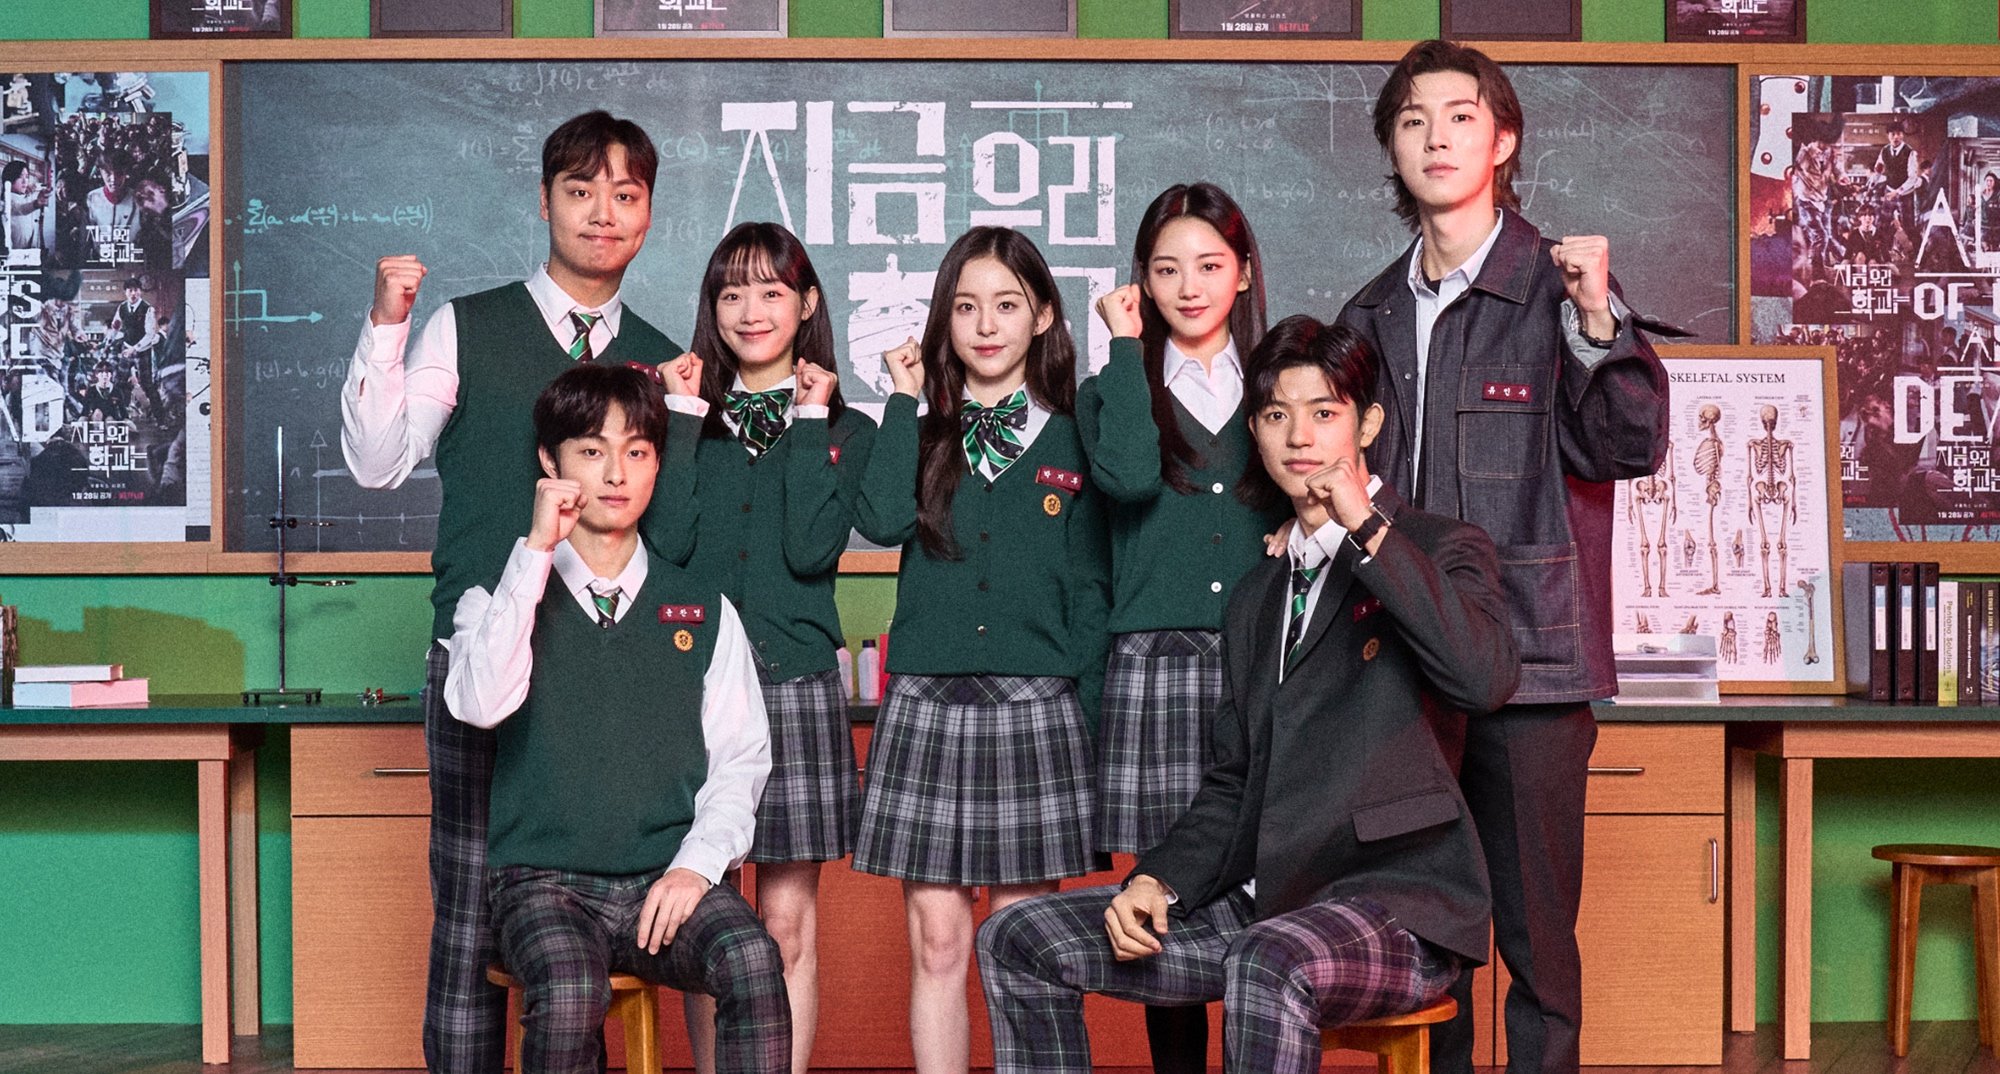 Main cast of 'All of Us Are Dead' press event wearing school uniforms